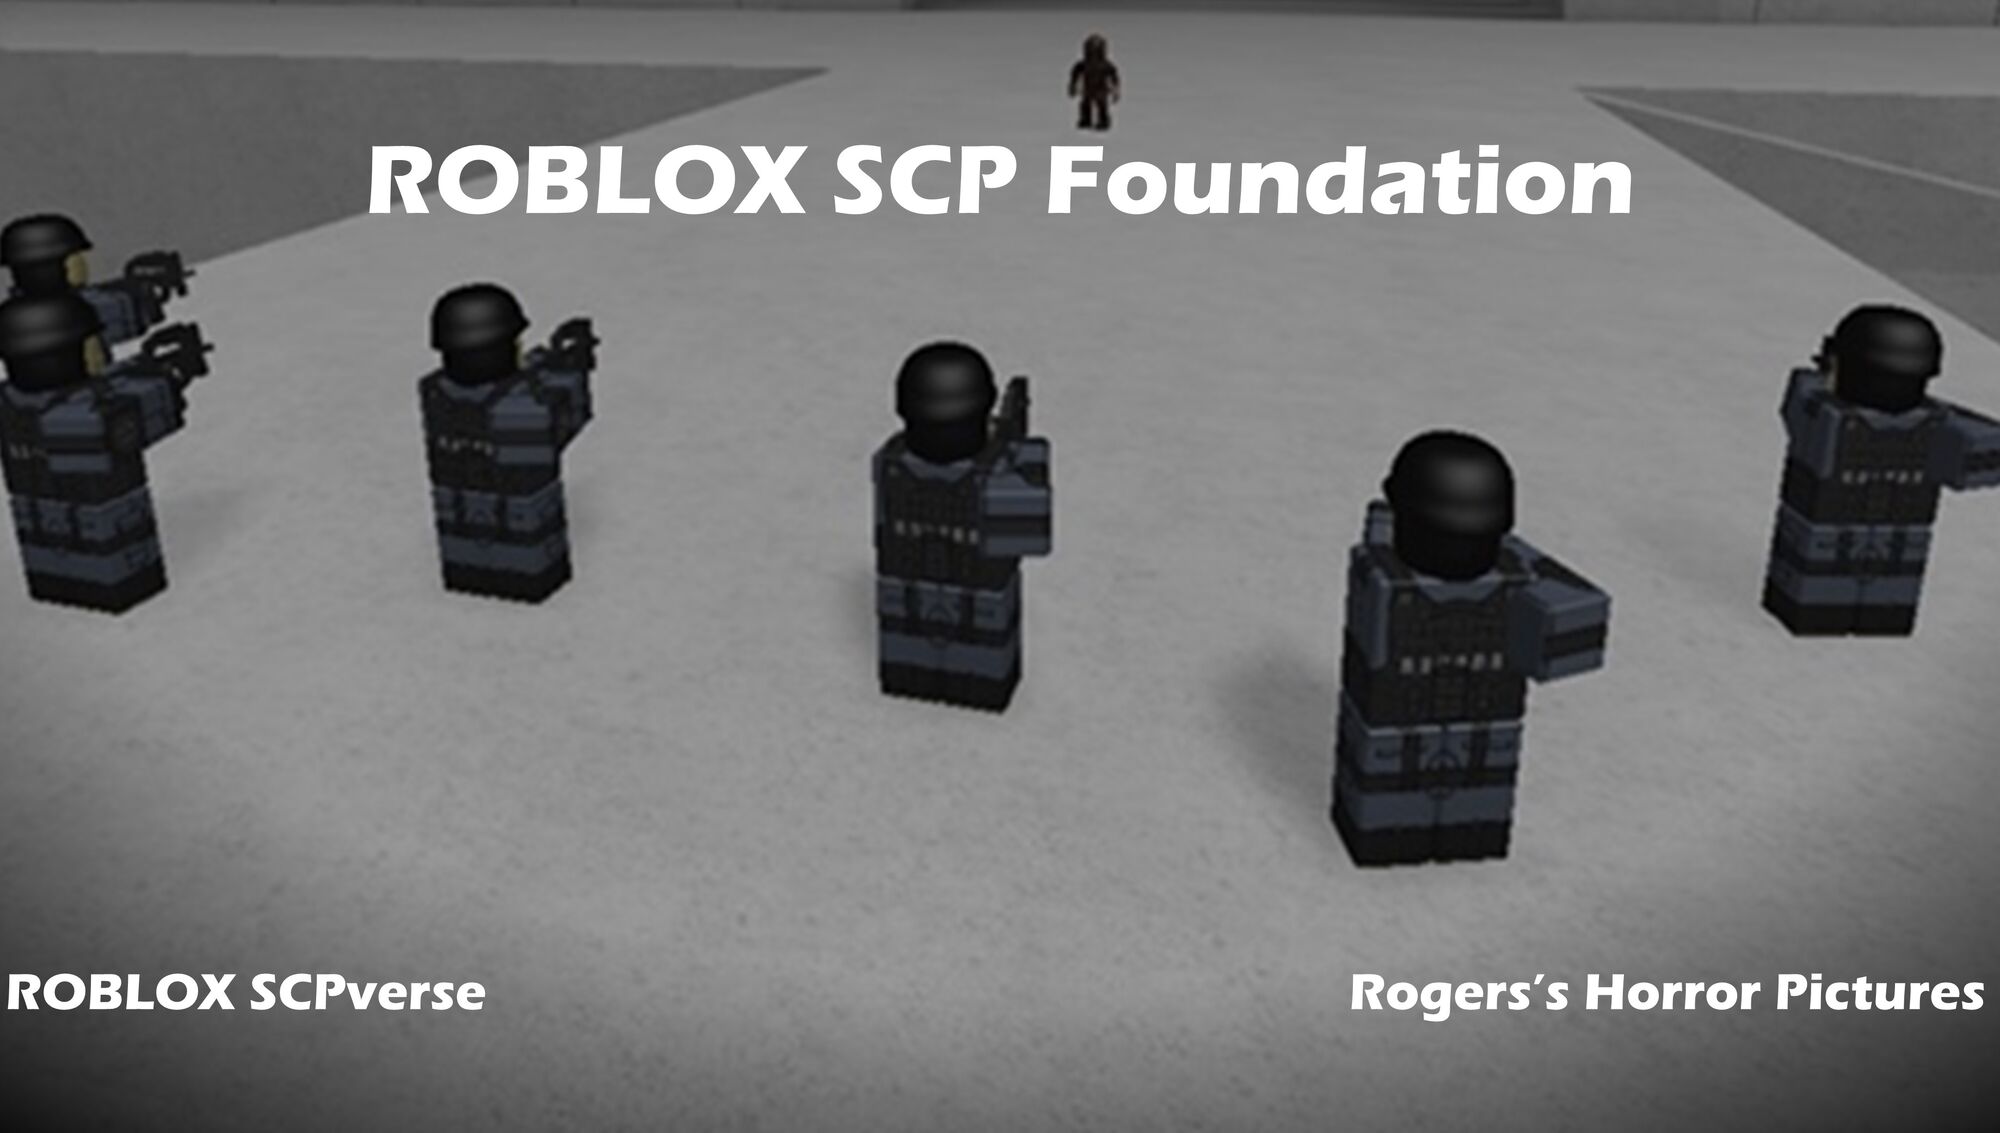 Roblox Scp Videos - scp 035 incident roblox scpverse wiki fandom powered by